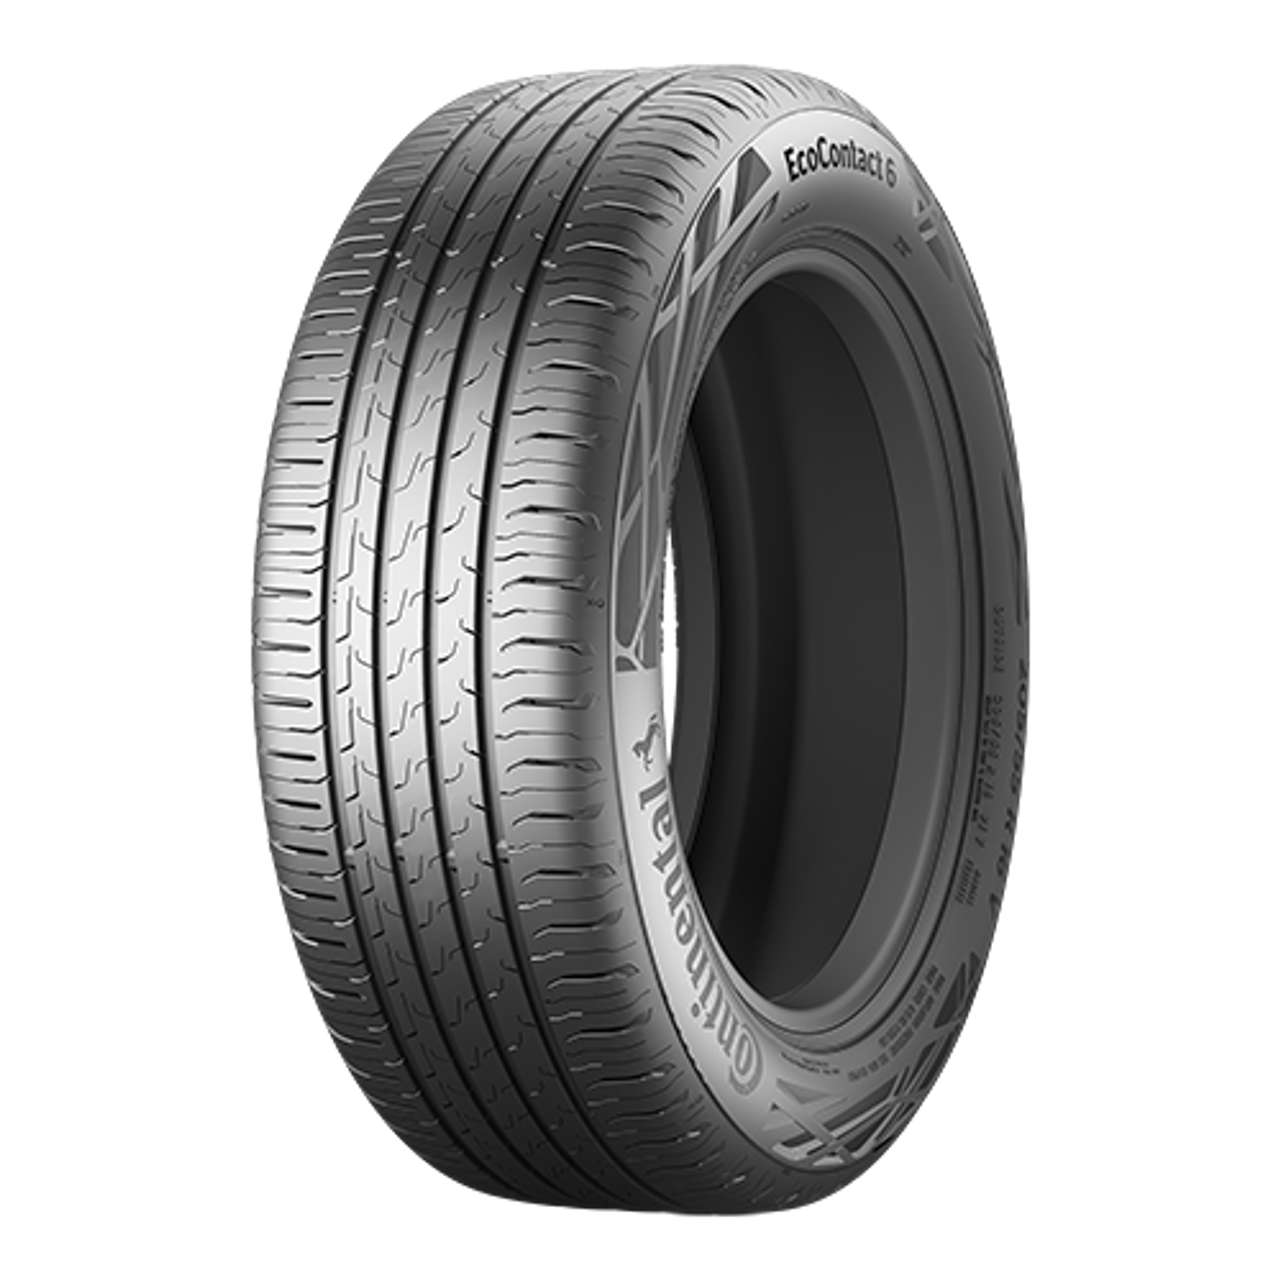 CONTINENTAL ECOCONTACT 6 (EVc) 205/55R16 91H 